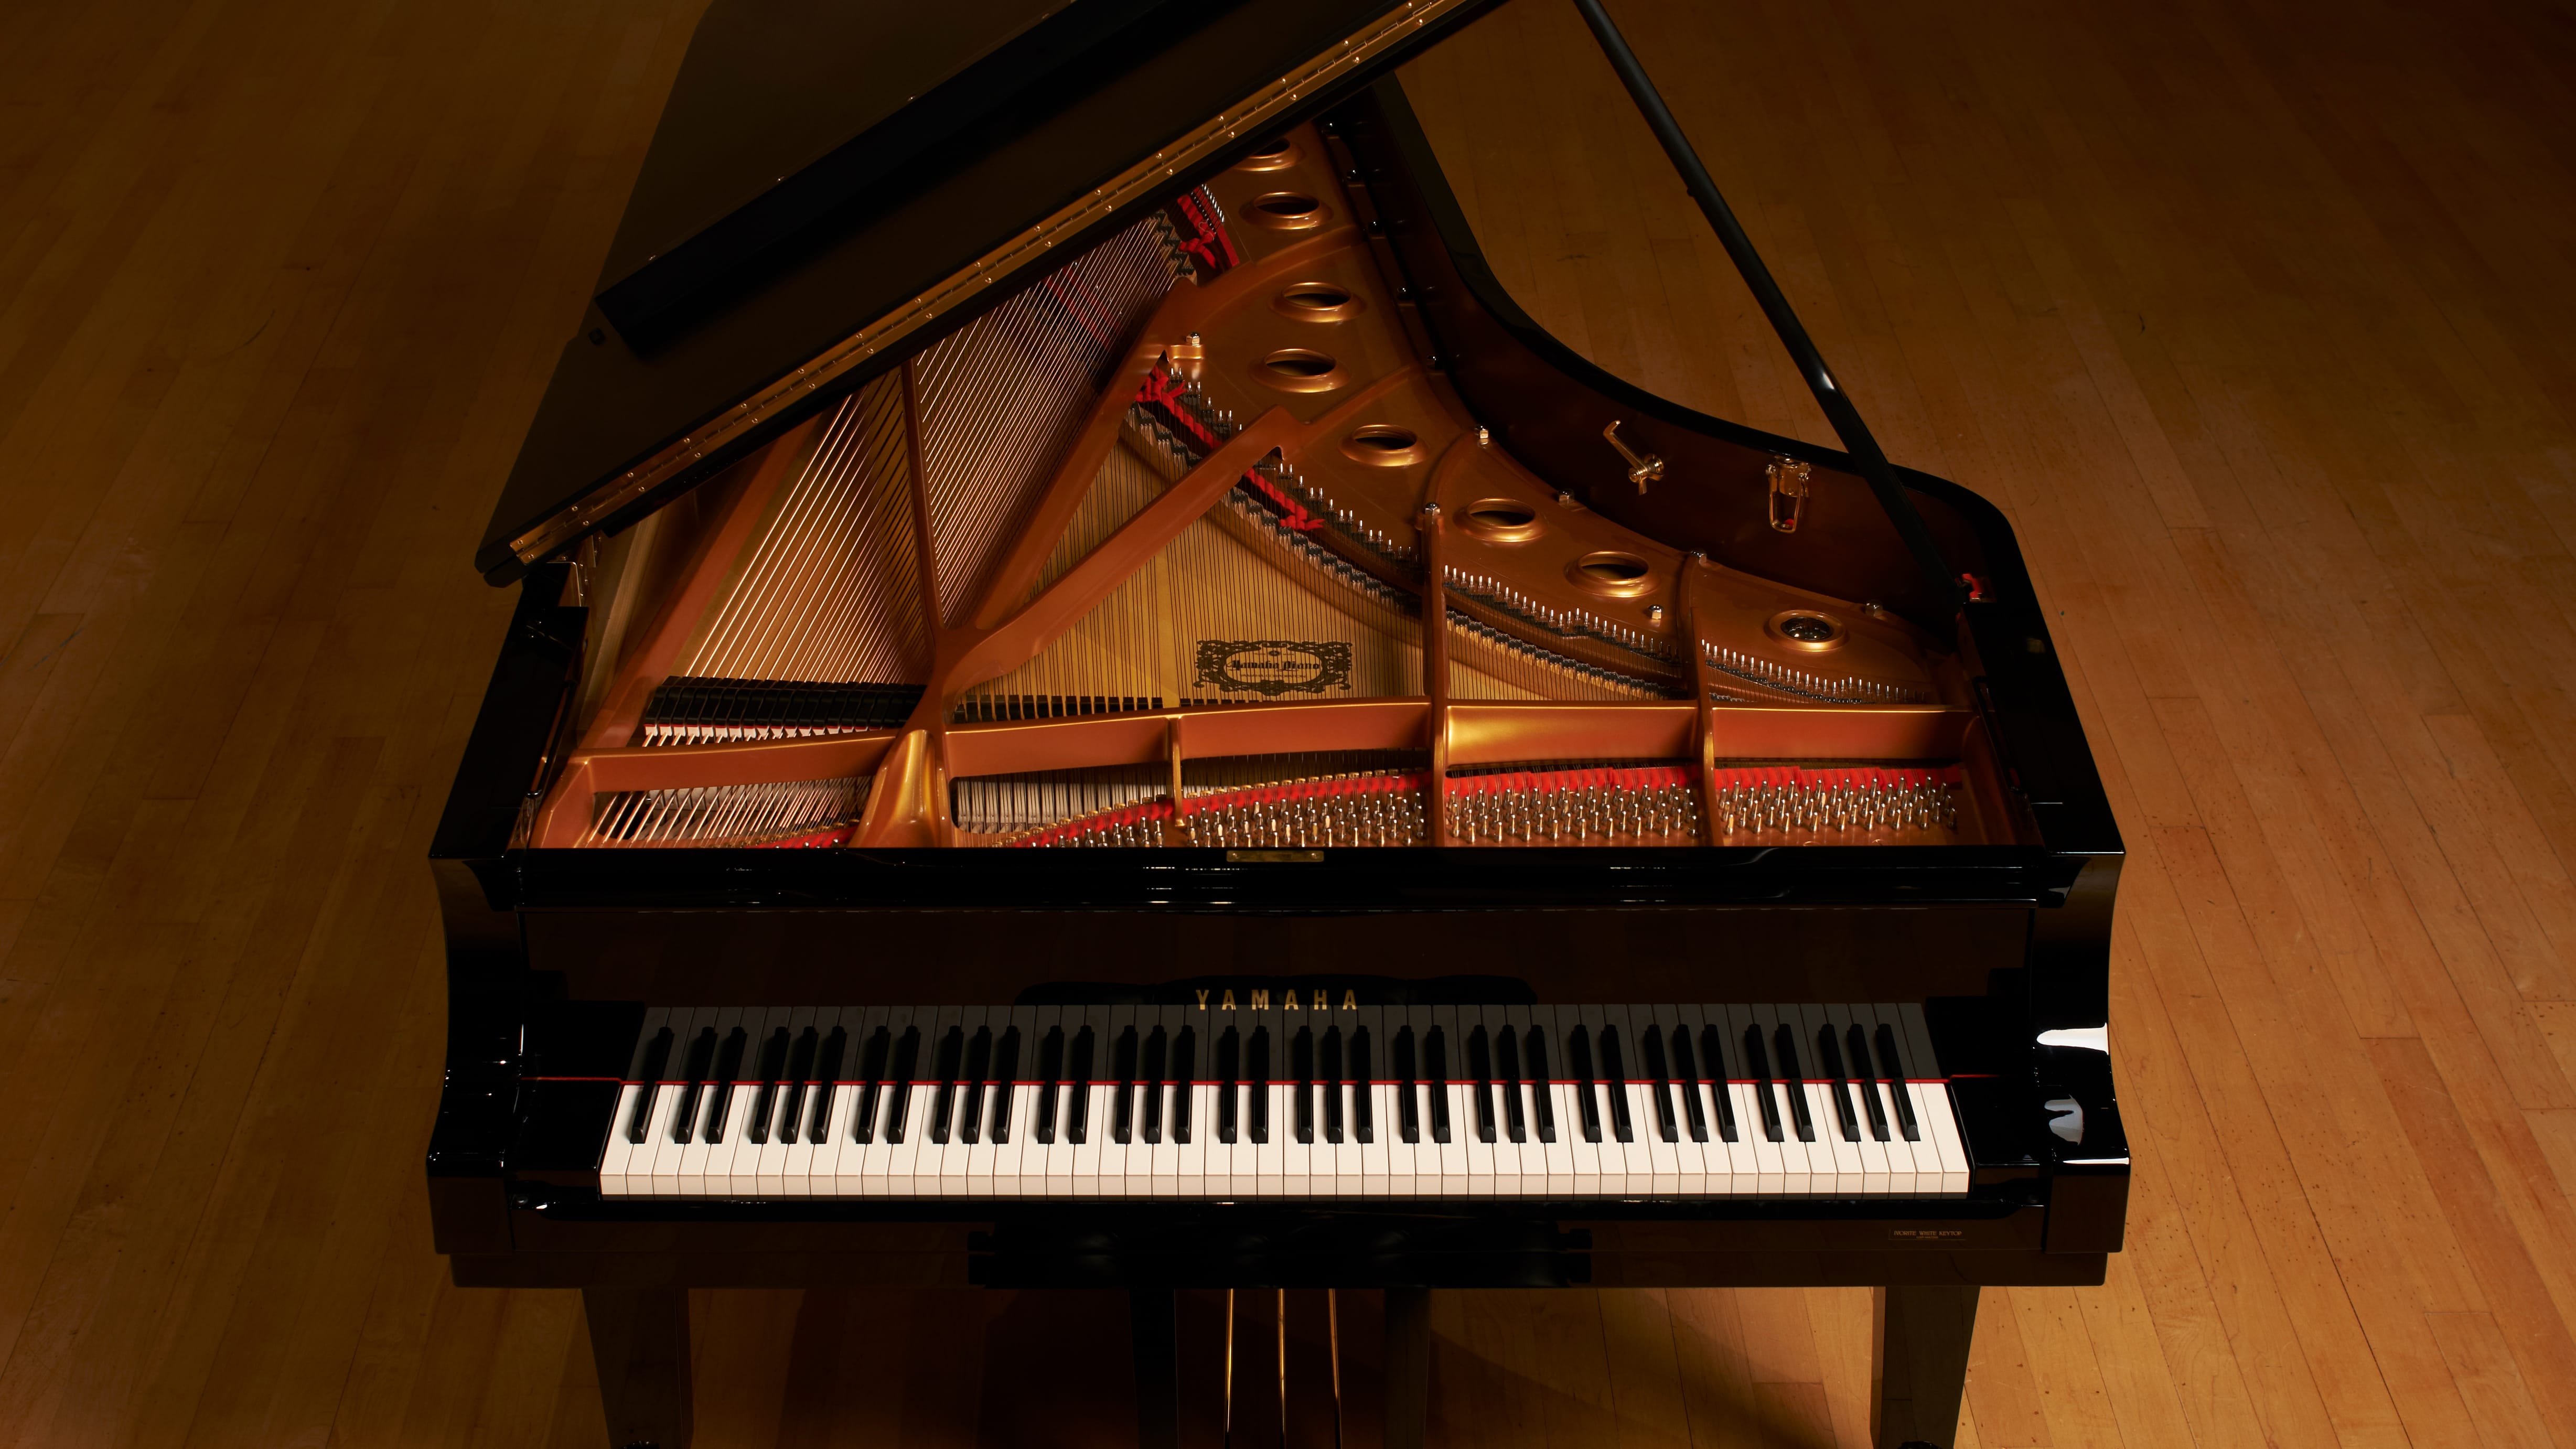 Piano as viewed from above